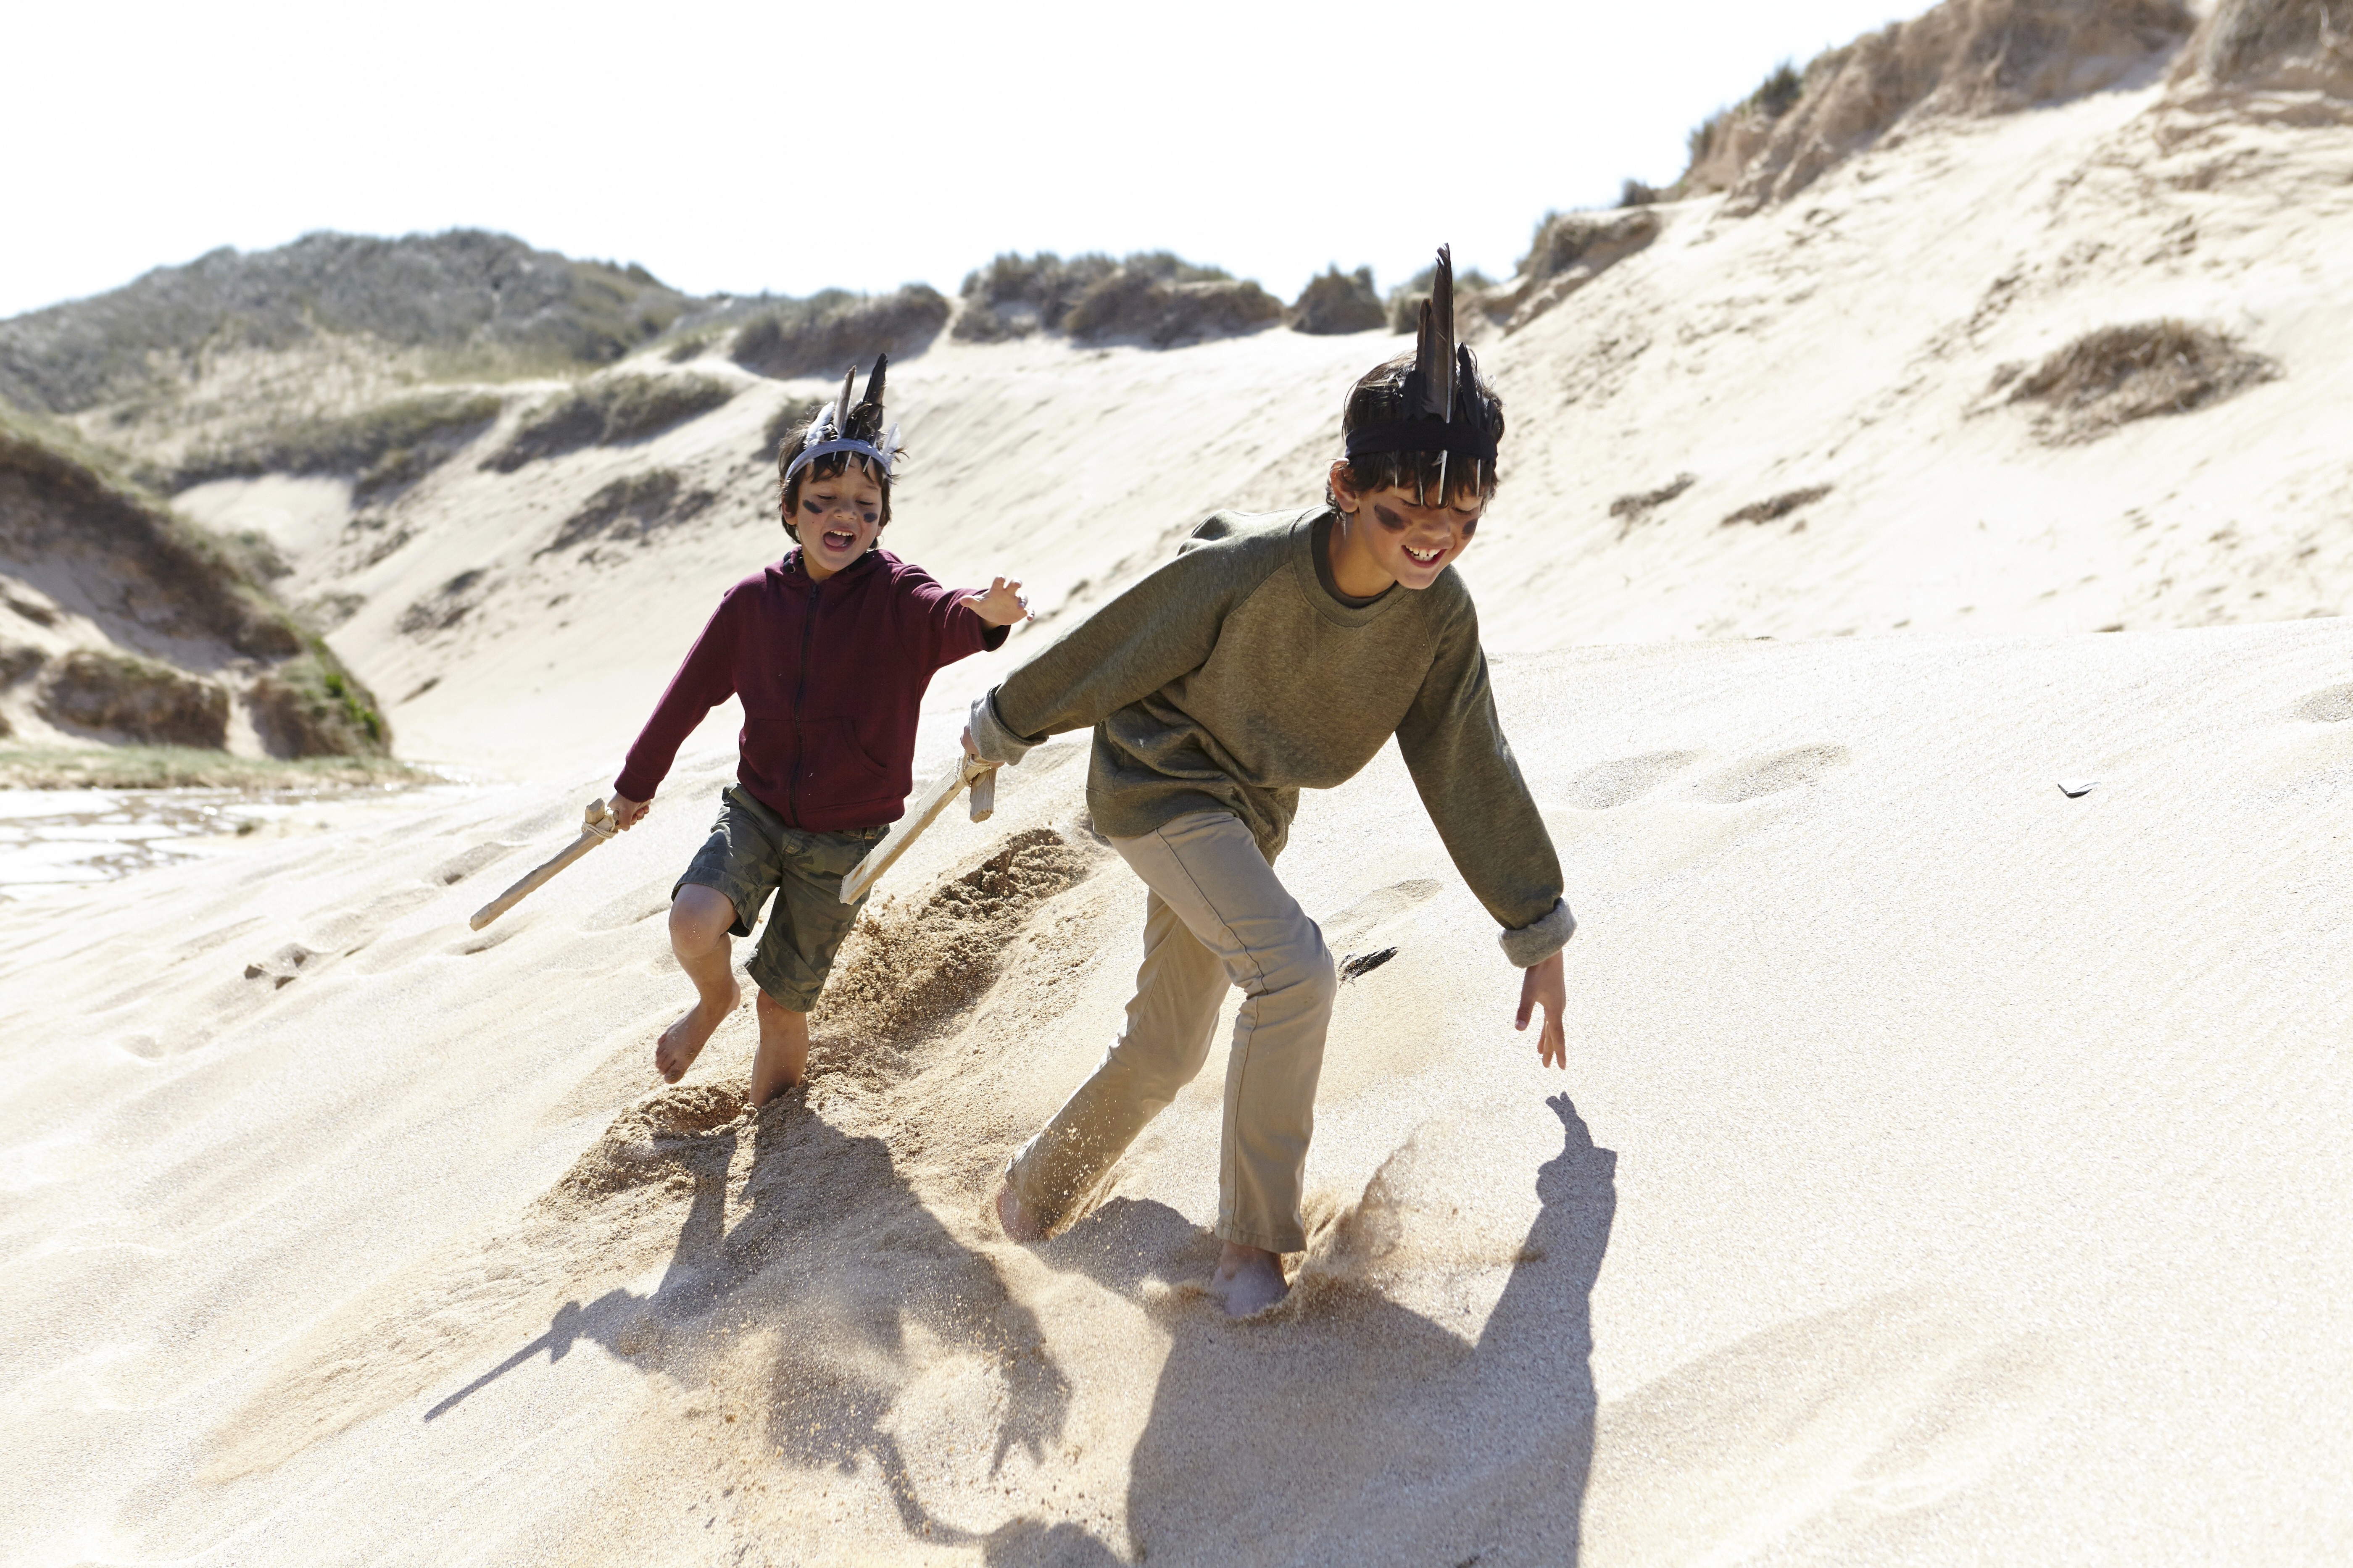 19 Apr 2015 --- Two boys, wearing fancy dress, playing on sand --- Image by © Janie Airey/Corbis [15DECEMBER2015 FEATURES FAMILY]